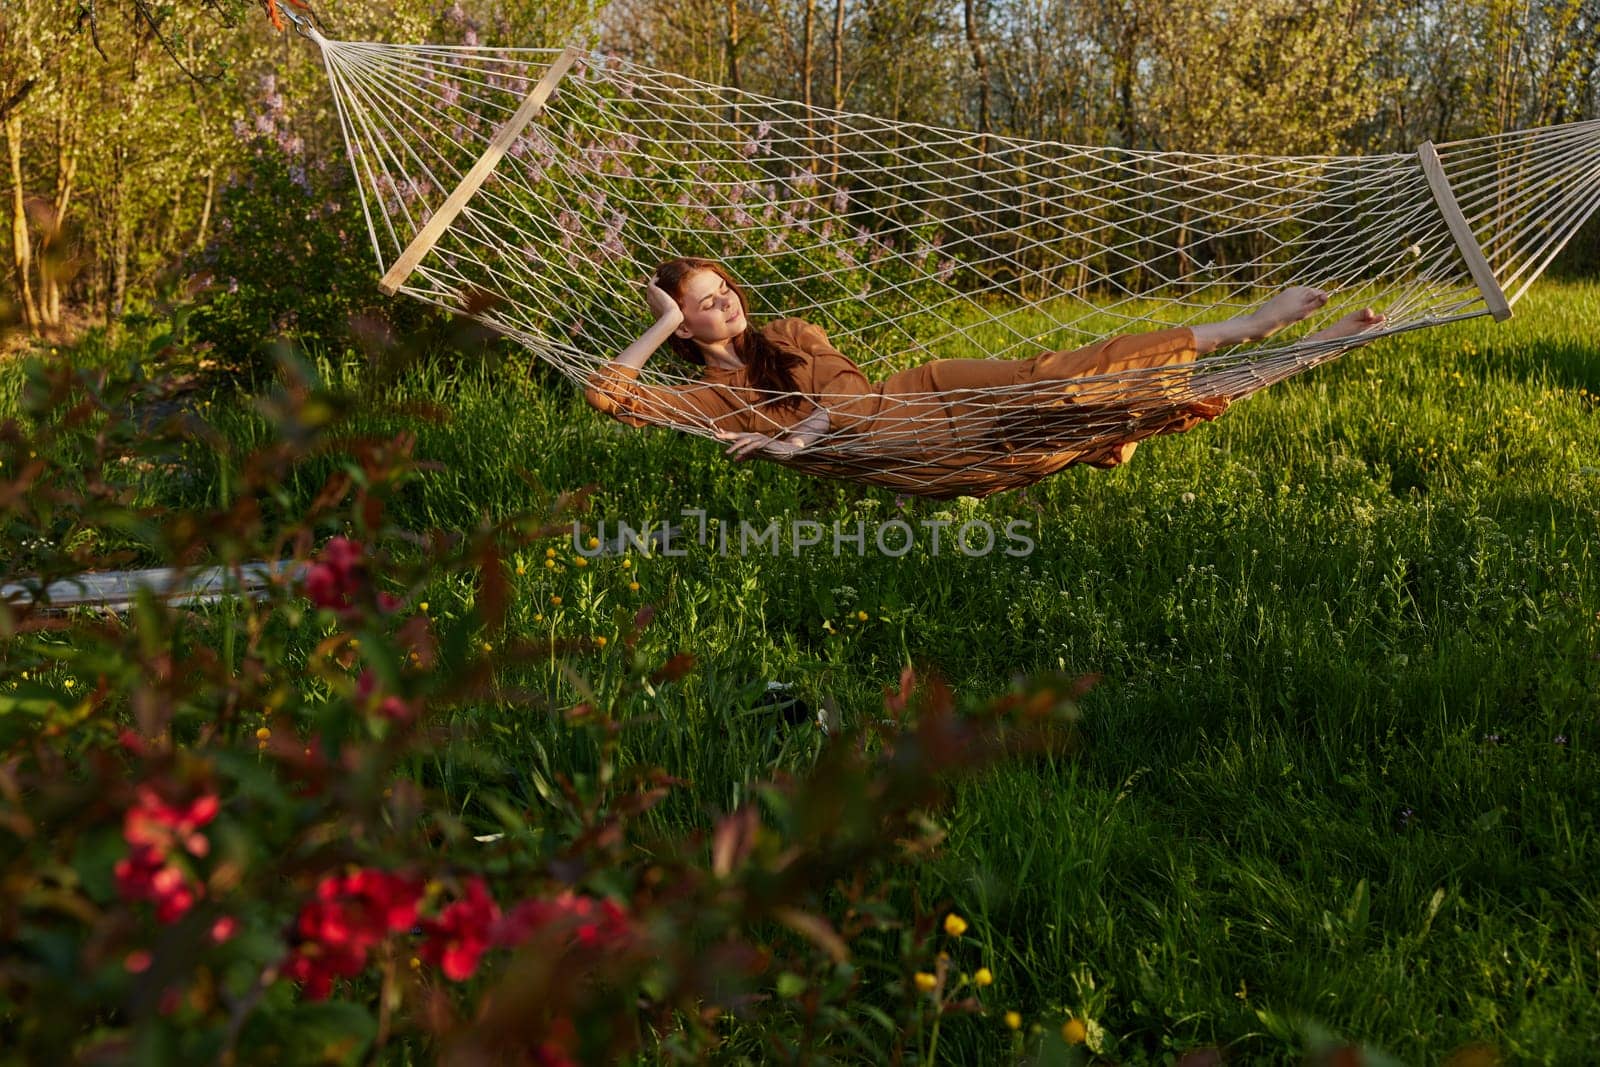 a happy woman in a long orange dress is relaxing in nature lying in a mesh hammock enjoying the peace and tranquility in the country surrounded by green foliage by Vichizh